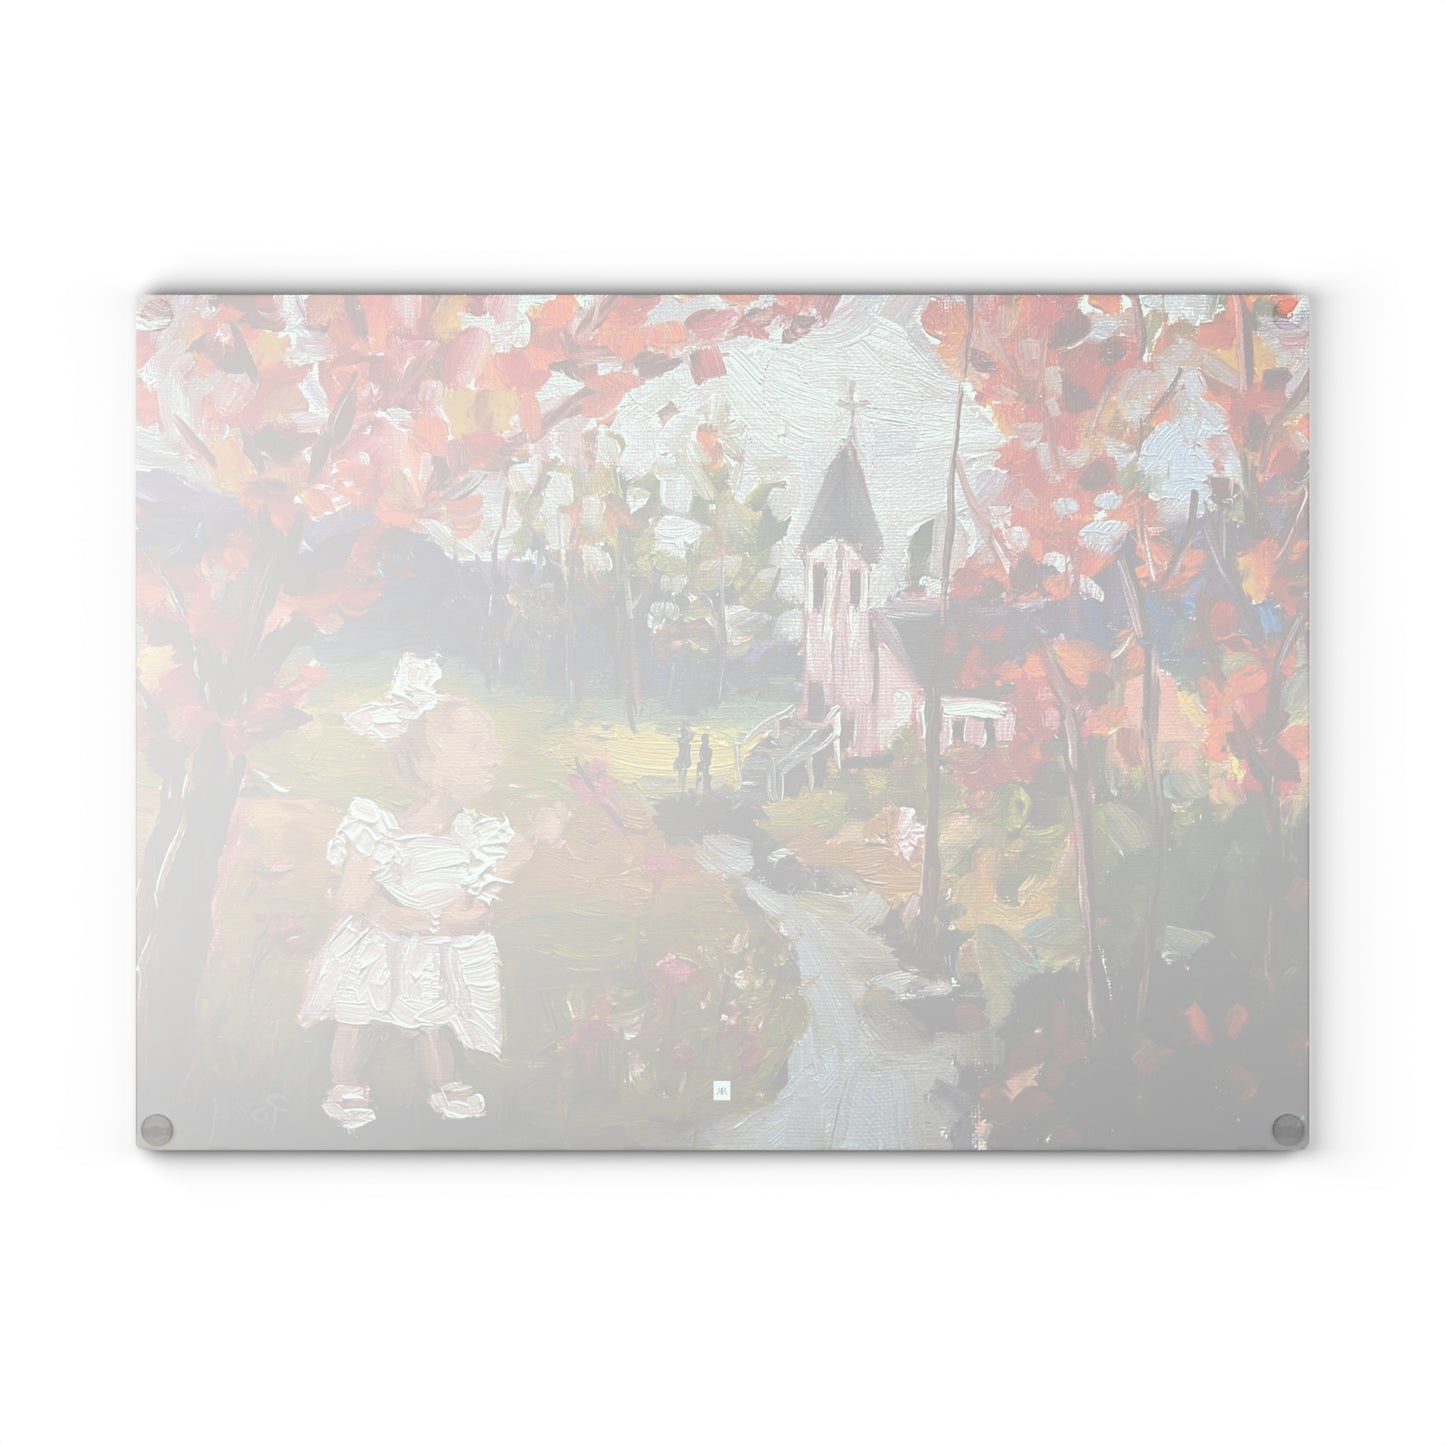 Isla at the Baptism (Rural Church Landscape with Toddler) Glass Cutting Board